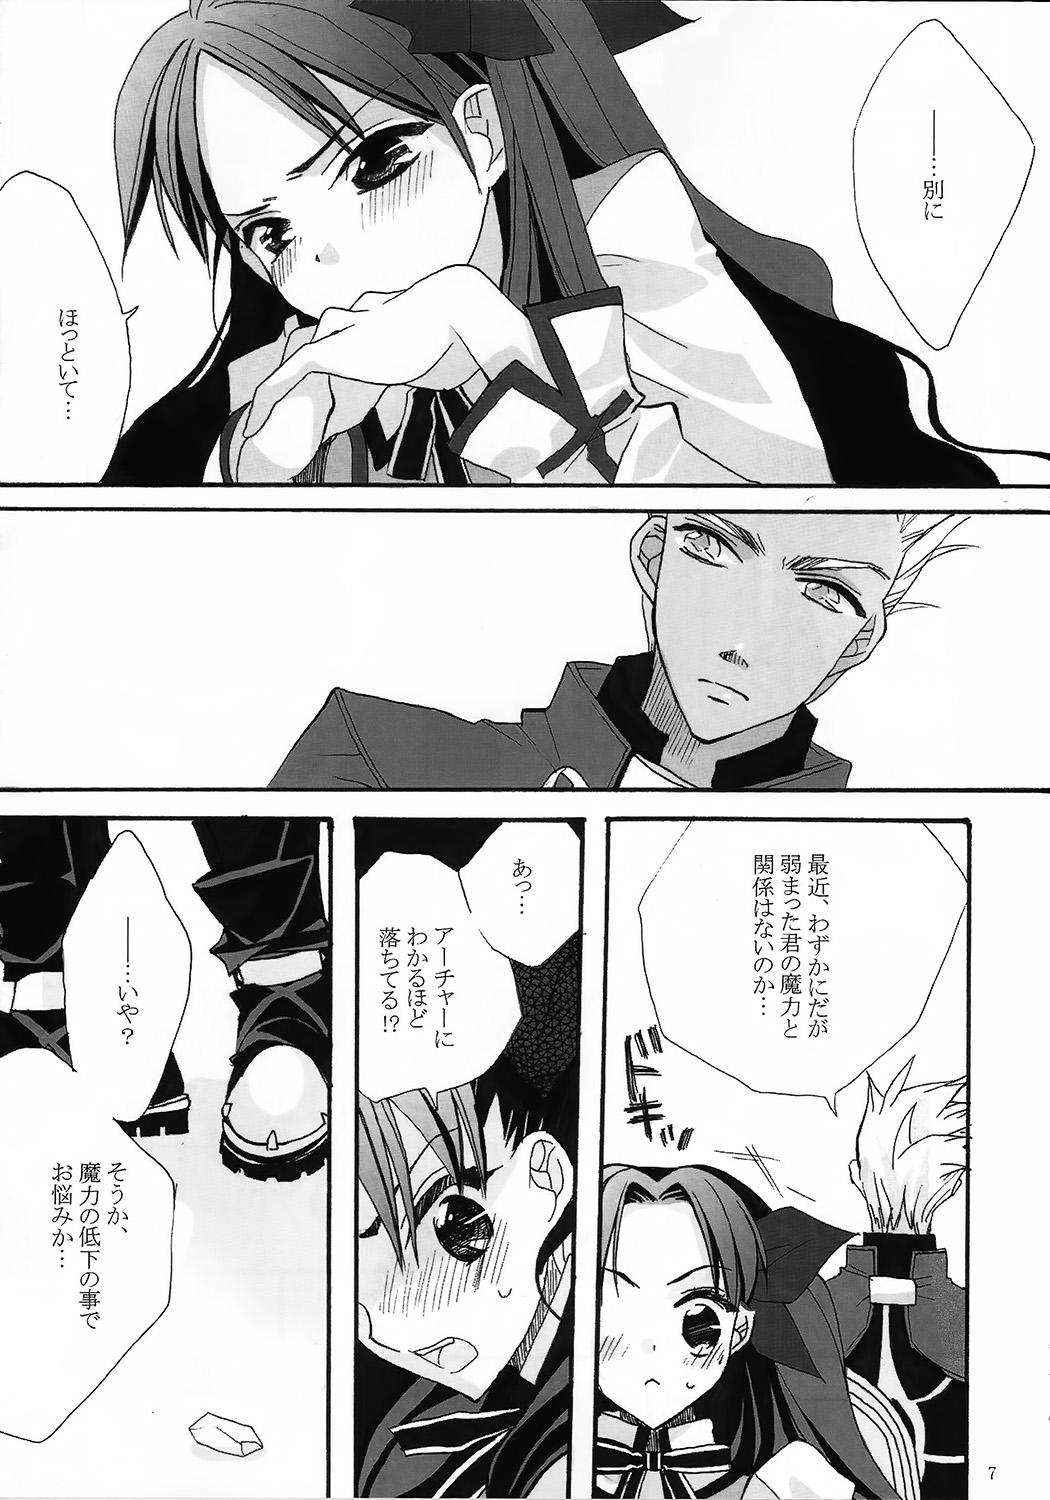 Emo RED ZONE - Fate stay night Shesafreak - Page 5